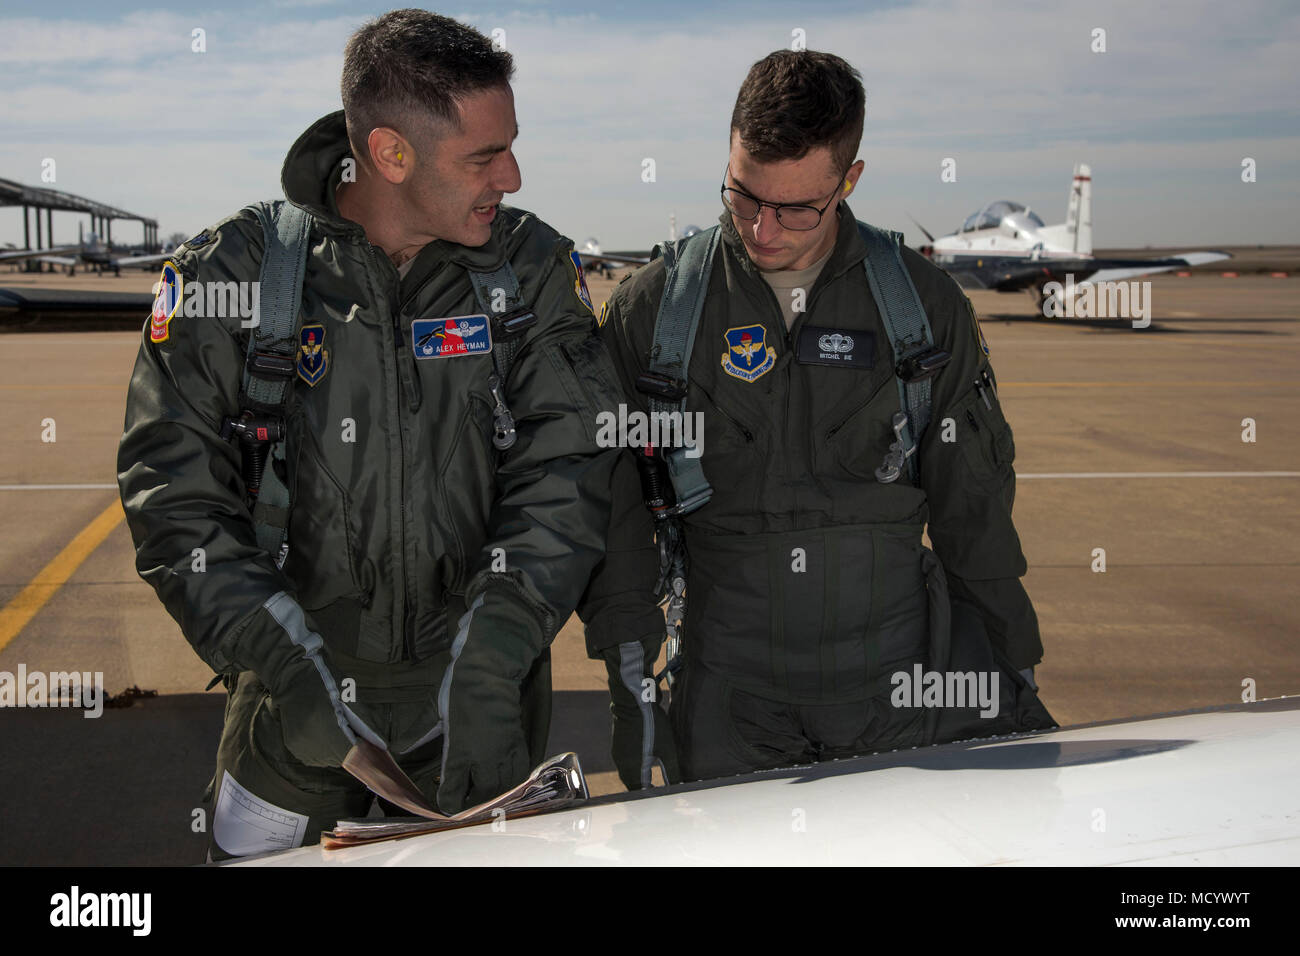 Lt. Col. Alexander Heyman, Commander, 71st Student Squadron, goes over the pre-flight checklist with 2nd Lt. Mitchel Bie, a student pilot at Vance, before Bie's 'Dollar Ride', March 8, 2018, Vance Air Force Base, Okla. Heyman and Bie went to the same highschool: Sycamore High School, Cincinnati, Ohio. (U.S. Air Force photo by Airman Zachary Heal) Stock Photo